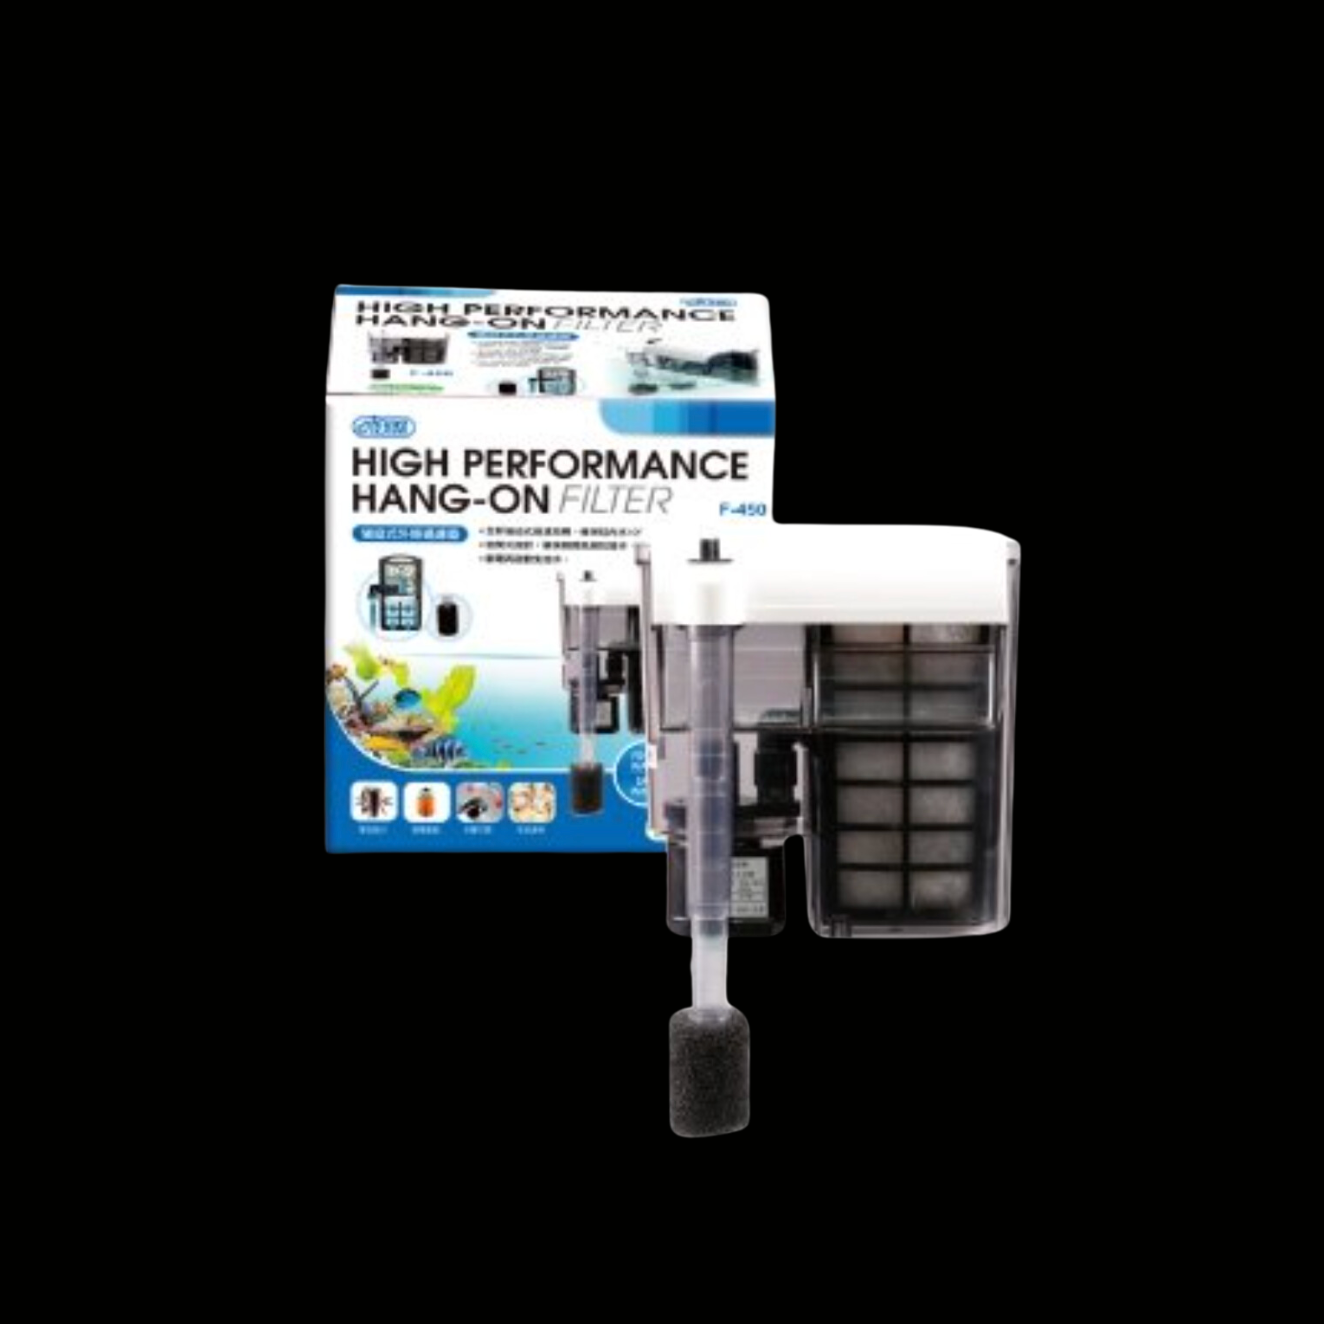 ISTA High Performance Hang-On Filters